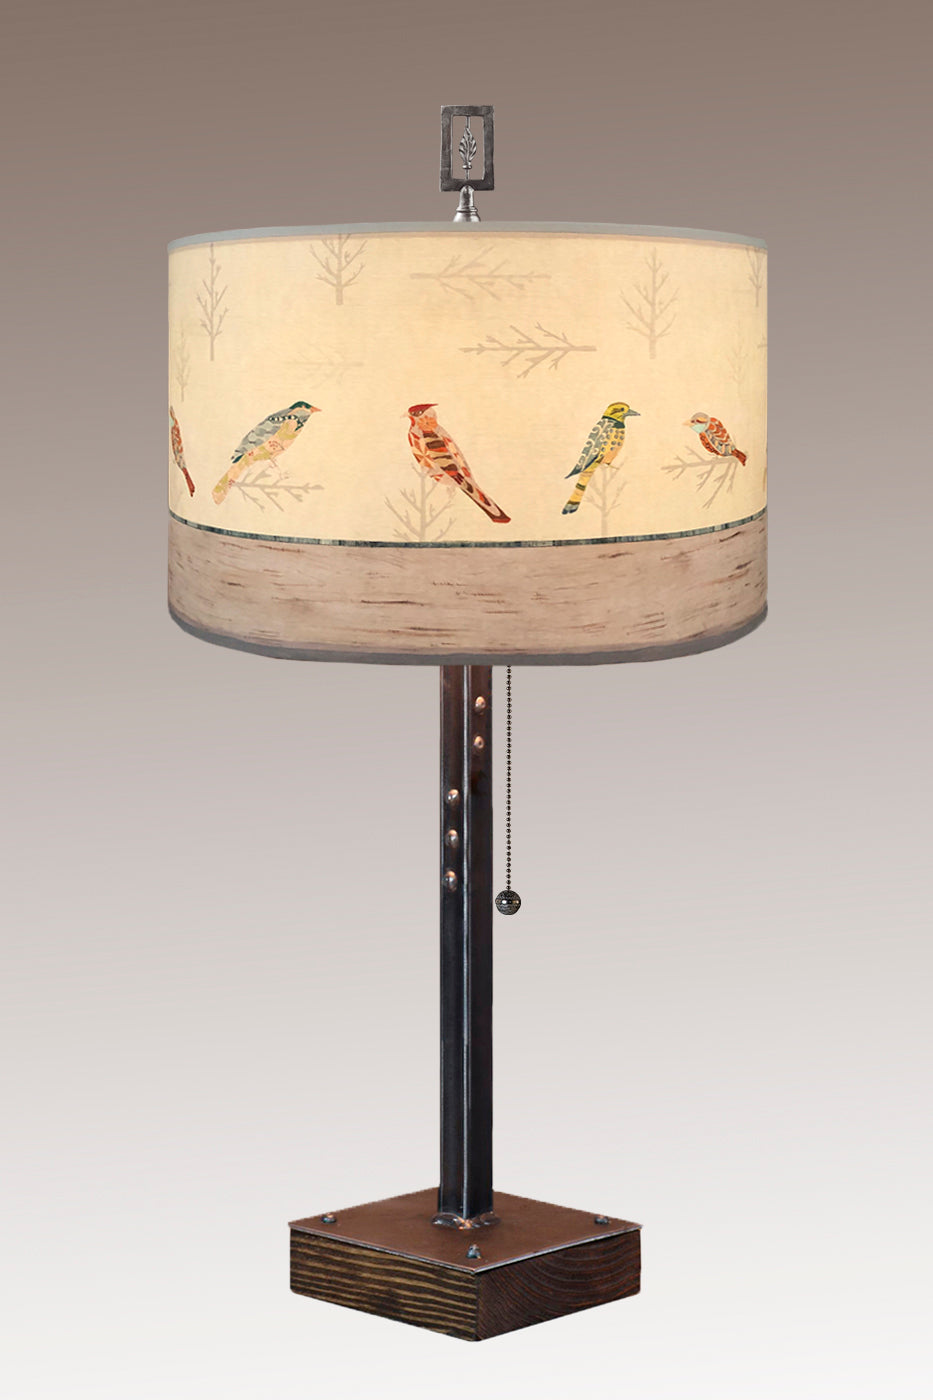 Janna Ugone & Co Table Lamps Steel Table Lamp on Wood with Large Drum Shade in Bird Friends